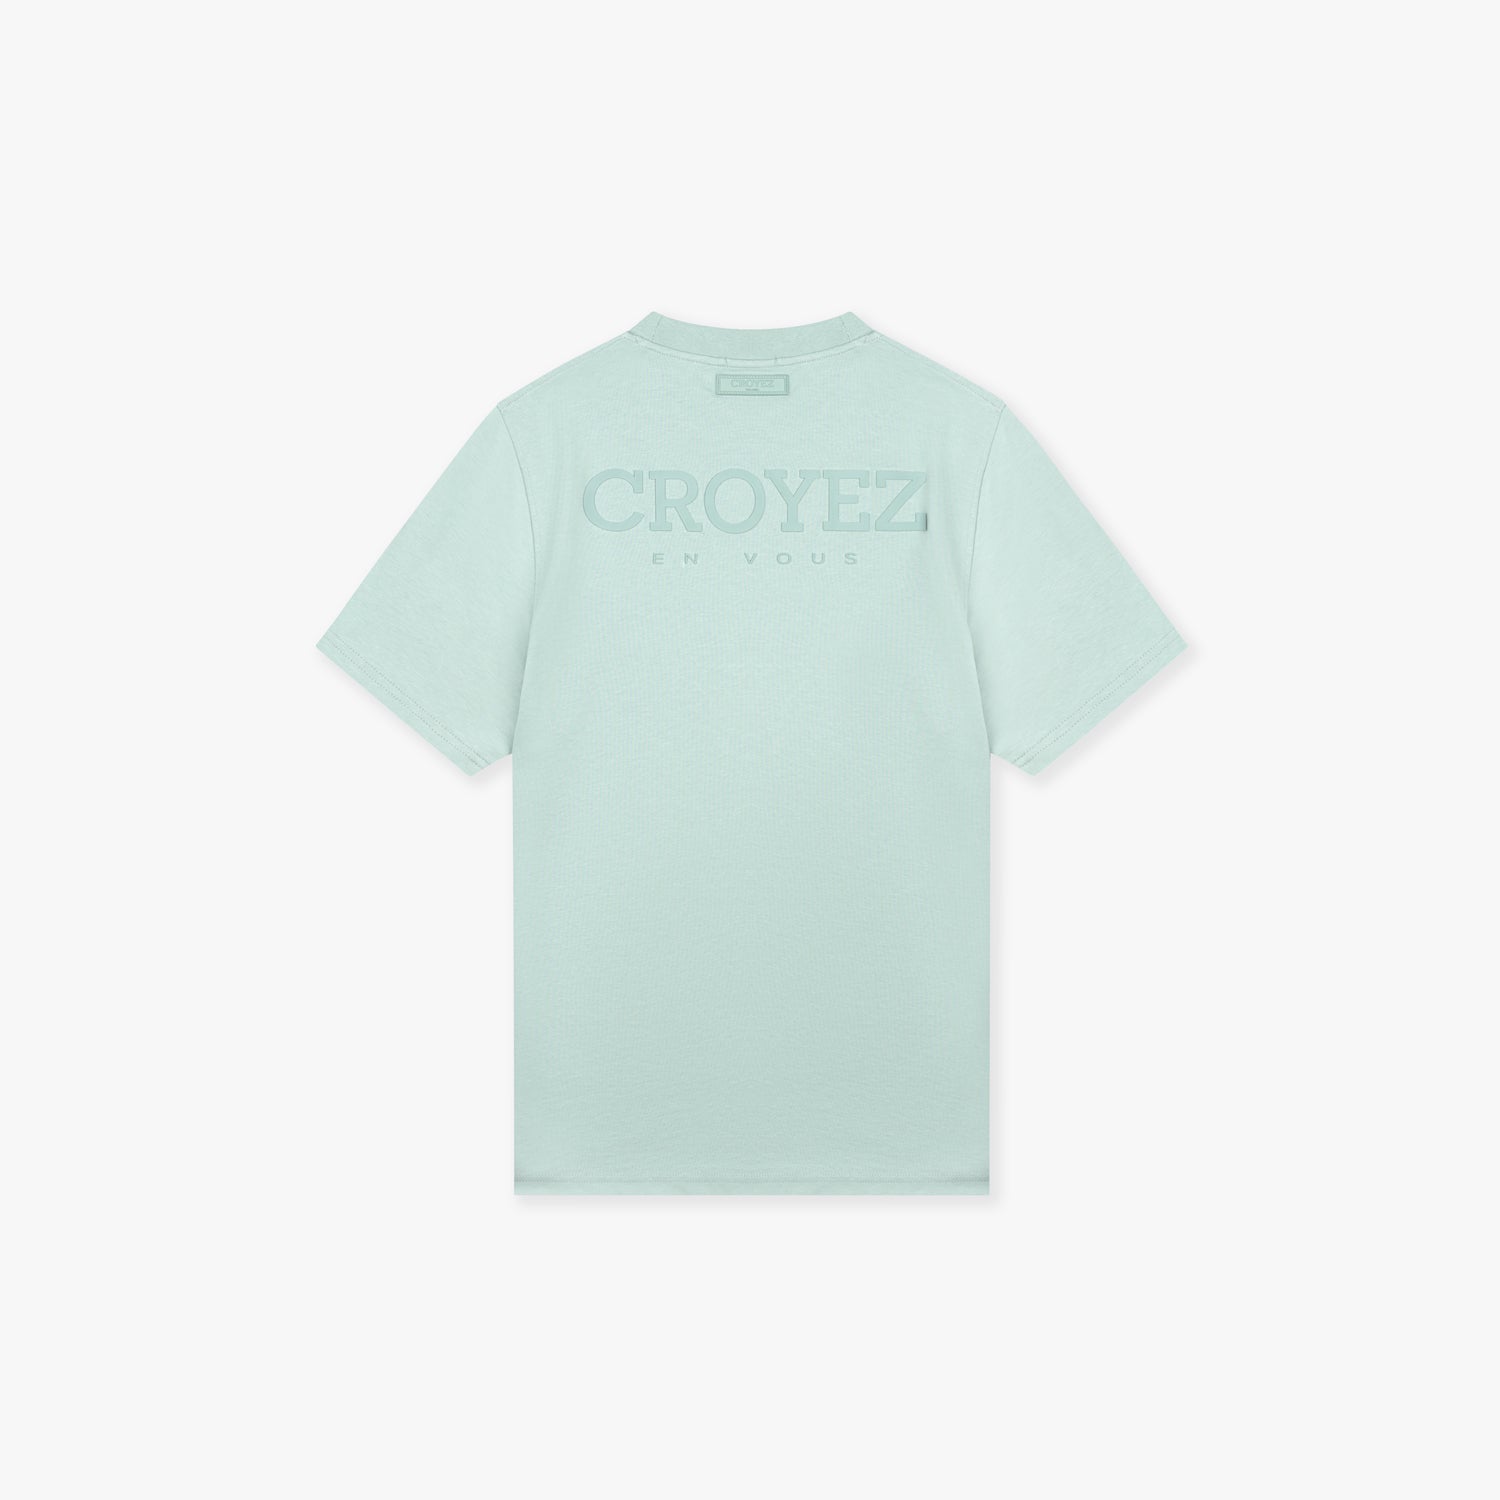 CROYEZ ABSTRACT T-SHIRT - BLUE SURF